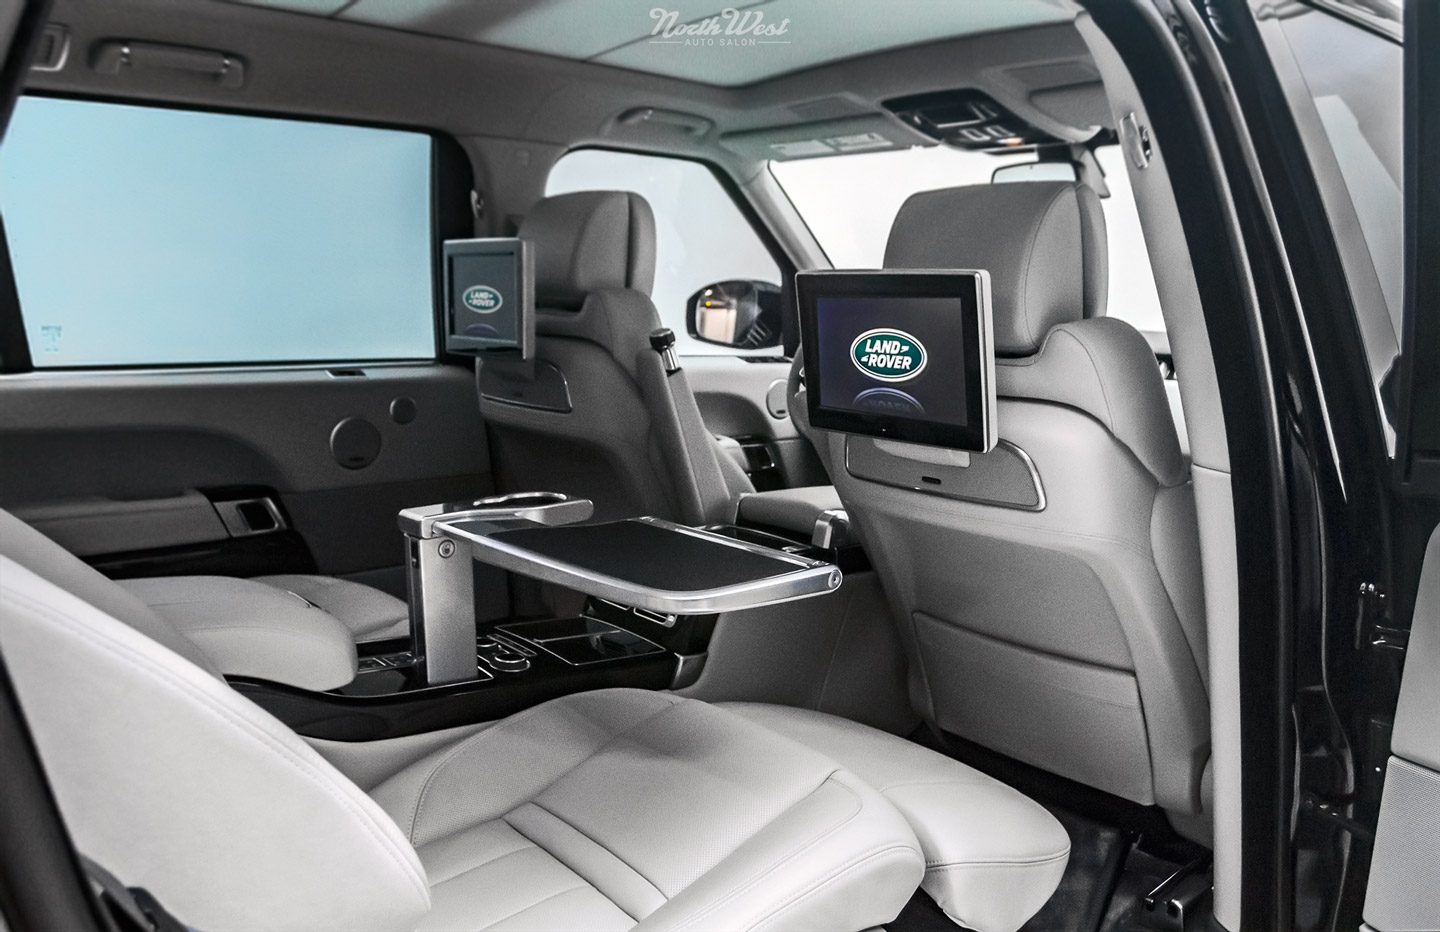 range-rover-sv-autobiography-new-car-detail-xpel-stealth-ppf-wrap-interior-seats-unfolded-s